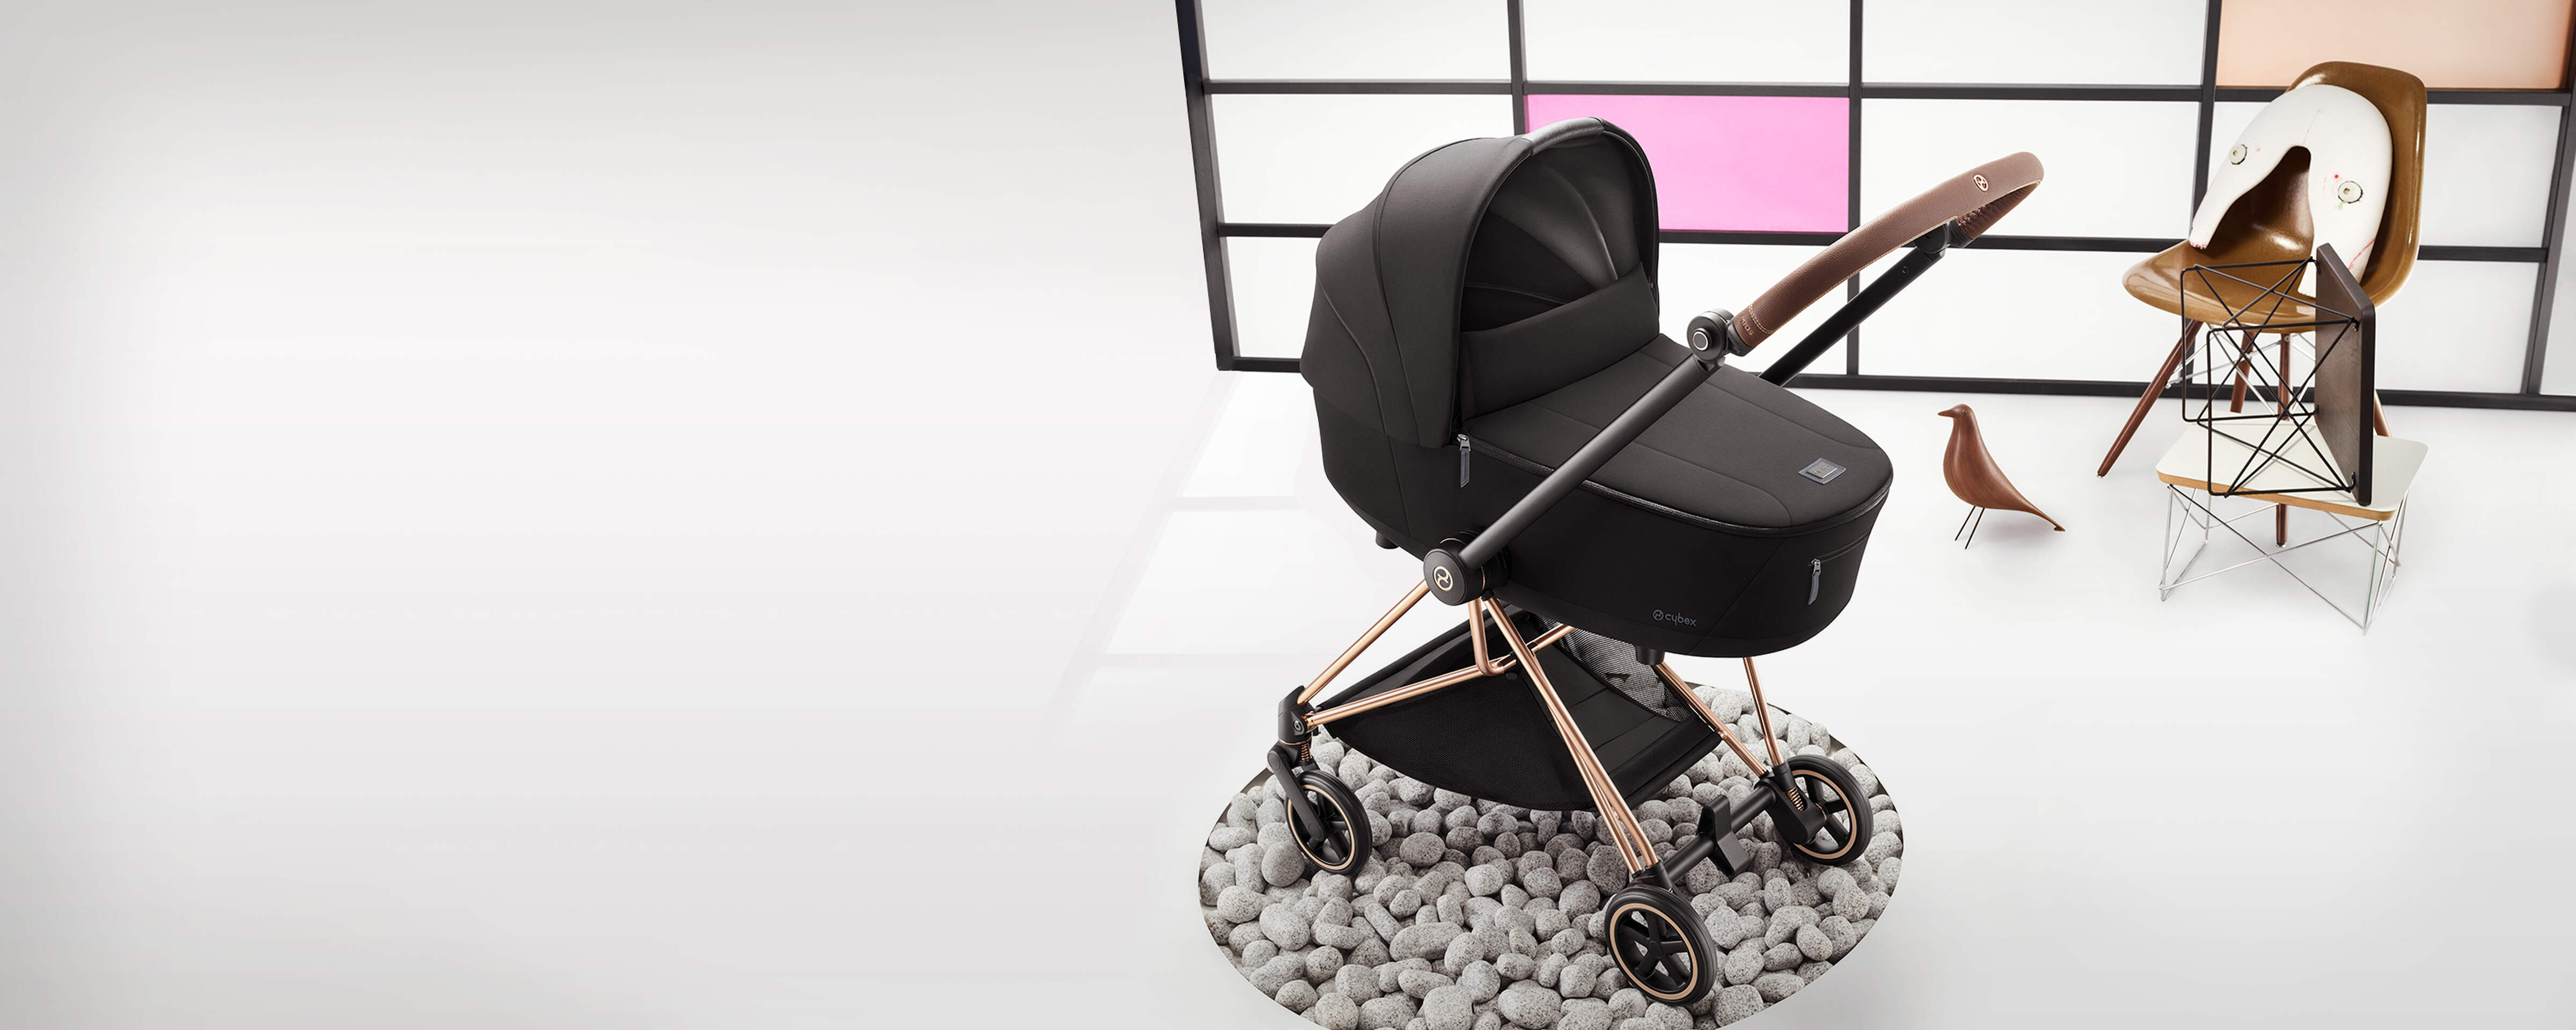 CYBEX Platinum Stroller Mios Carry Cot shown on Mios Frame Banner